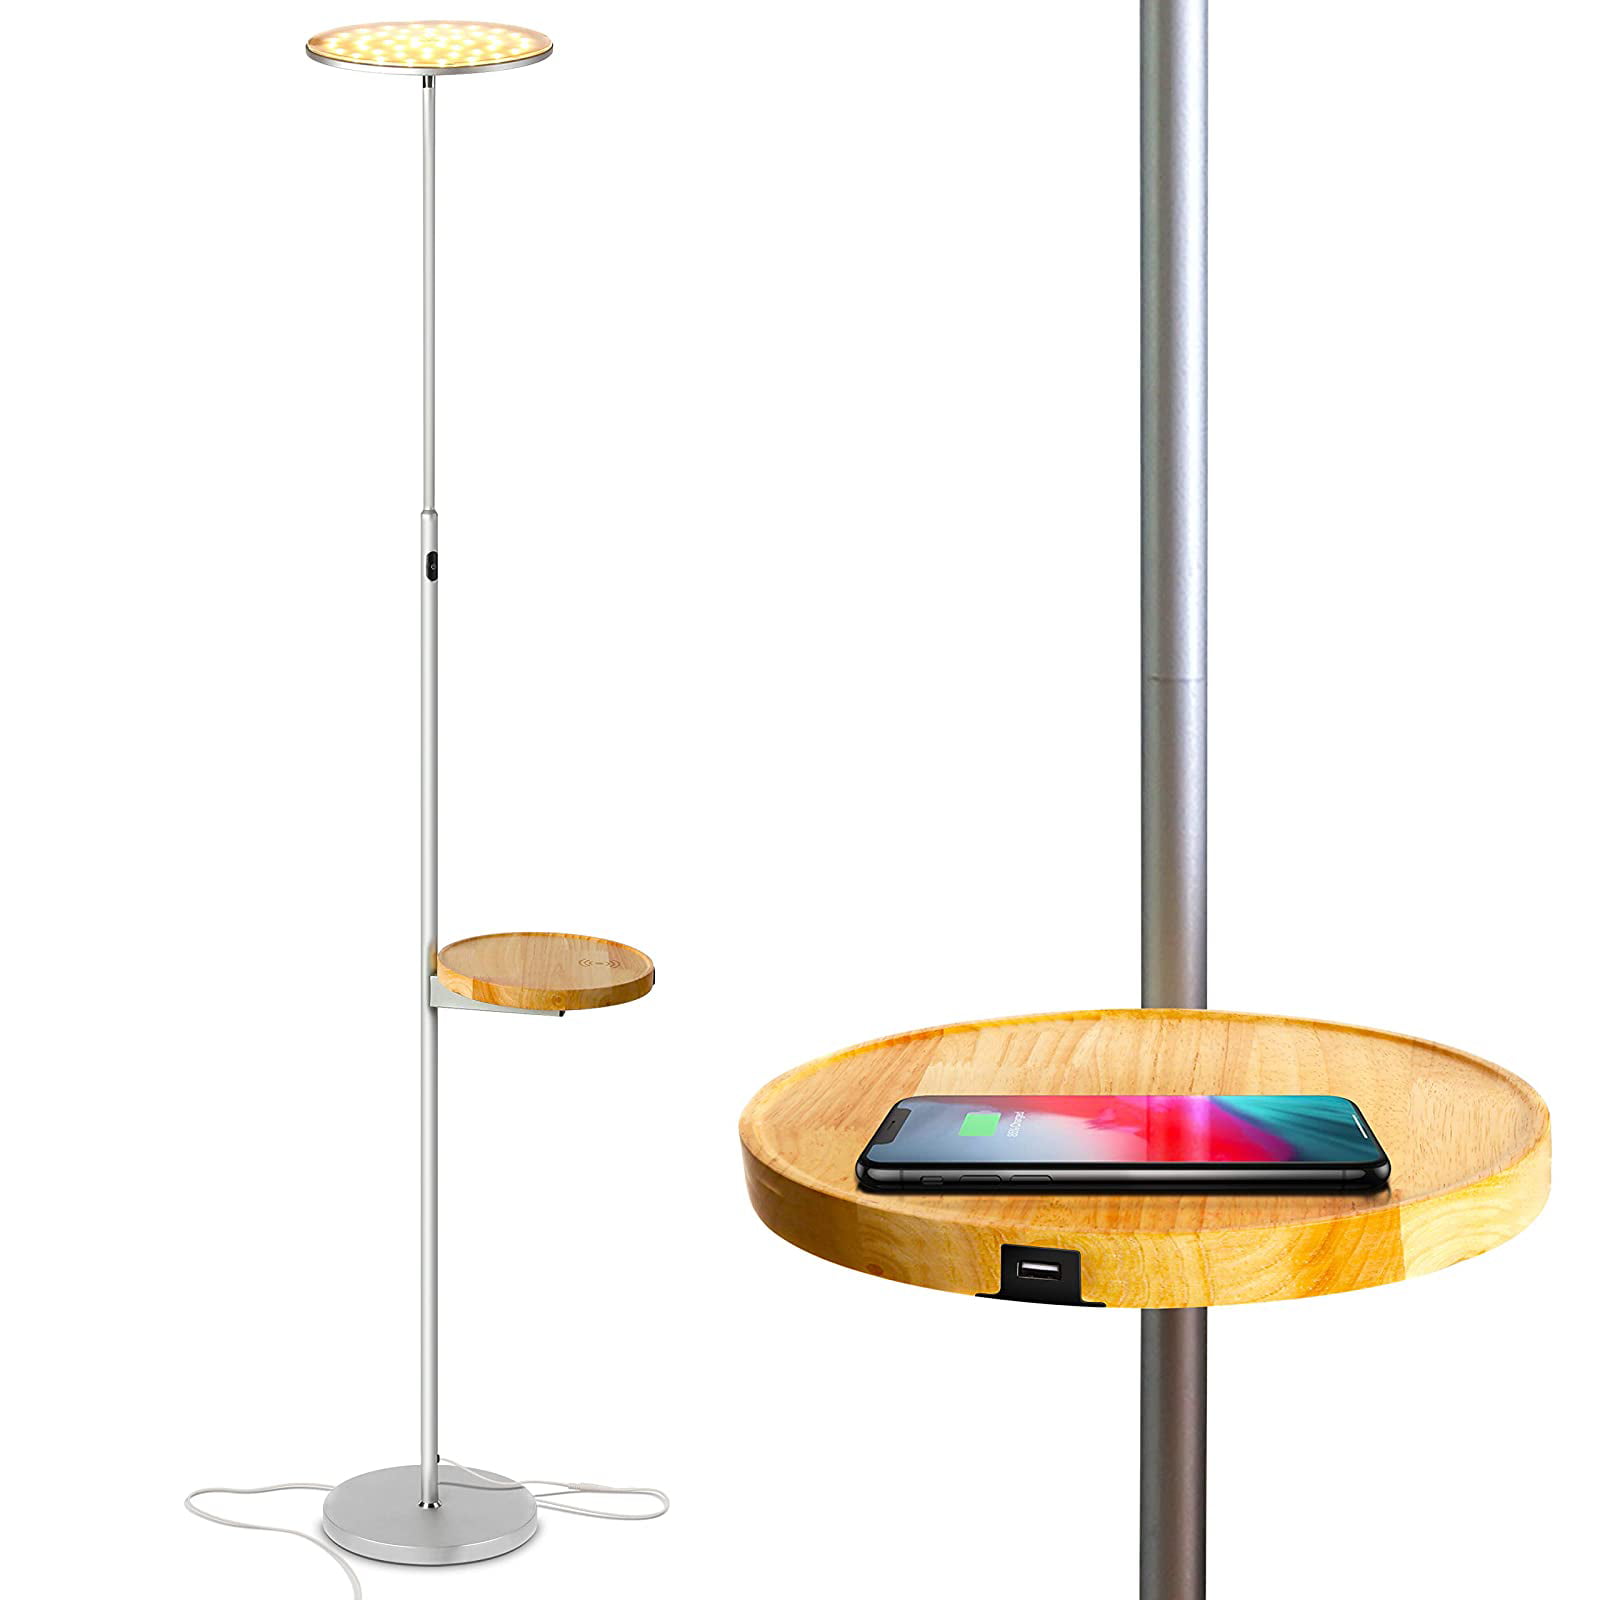 Brightech Sky Ultra Led Floor Lamp, Torchiere Floor Lamp With Shelf